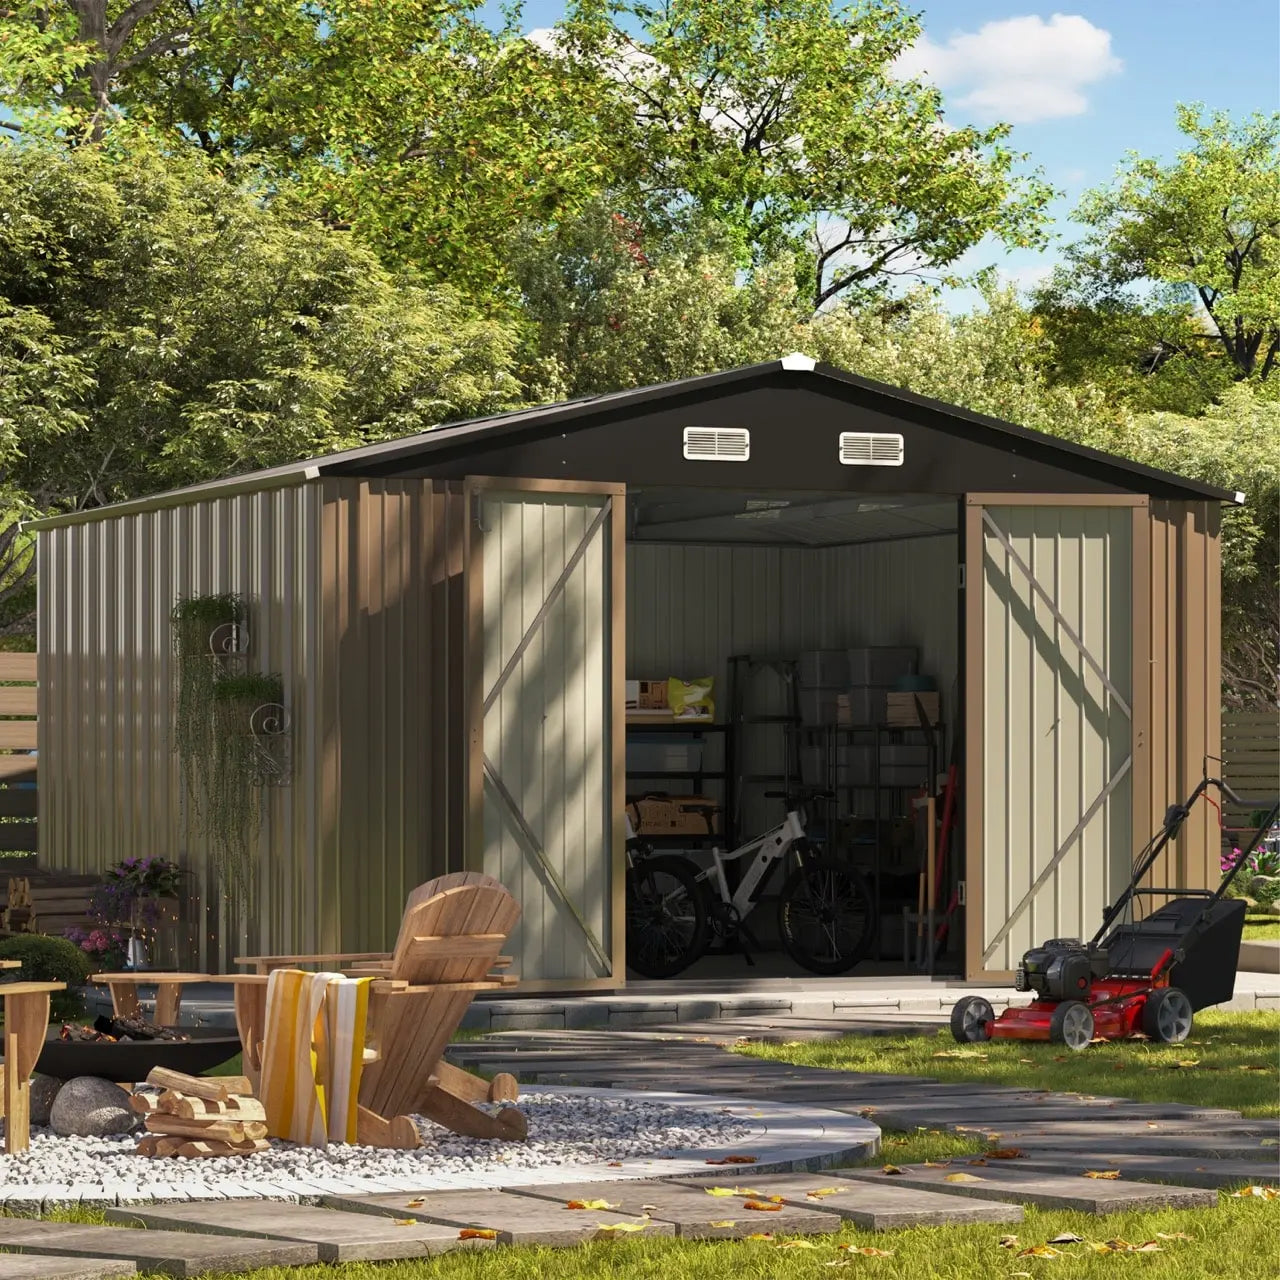 Patiowell 10x10 Metal Shed Pro